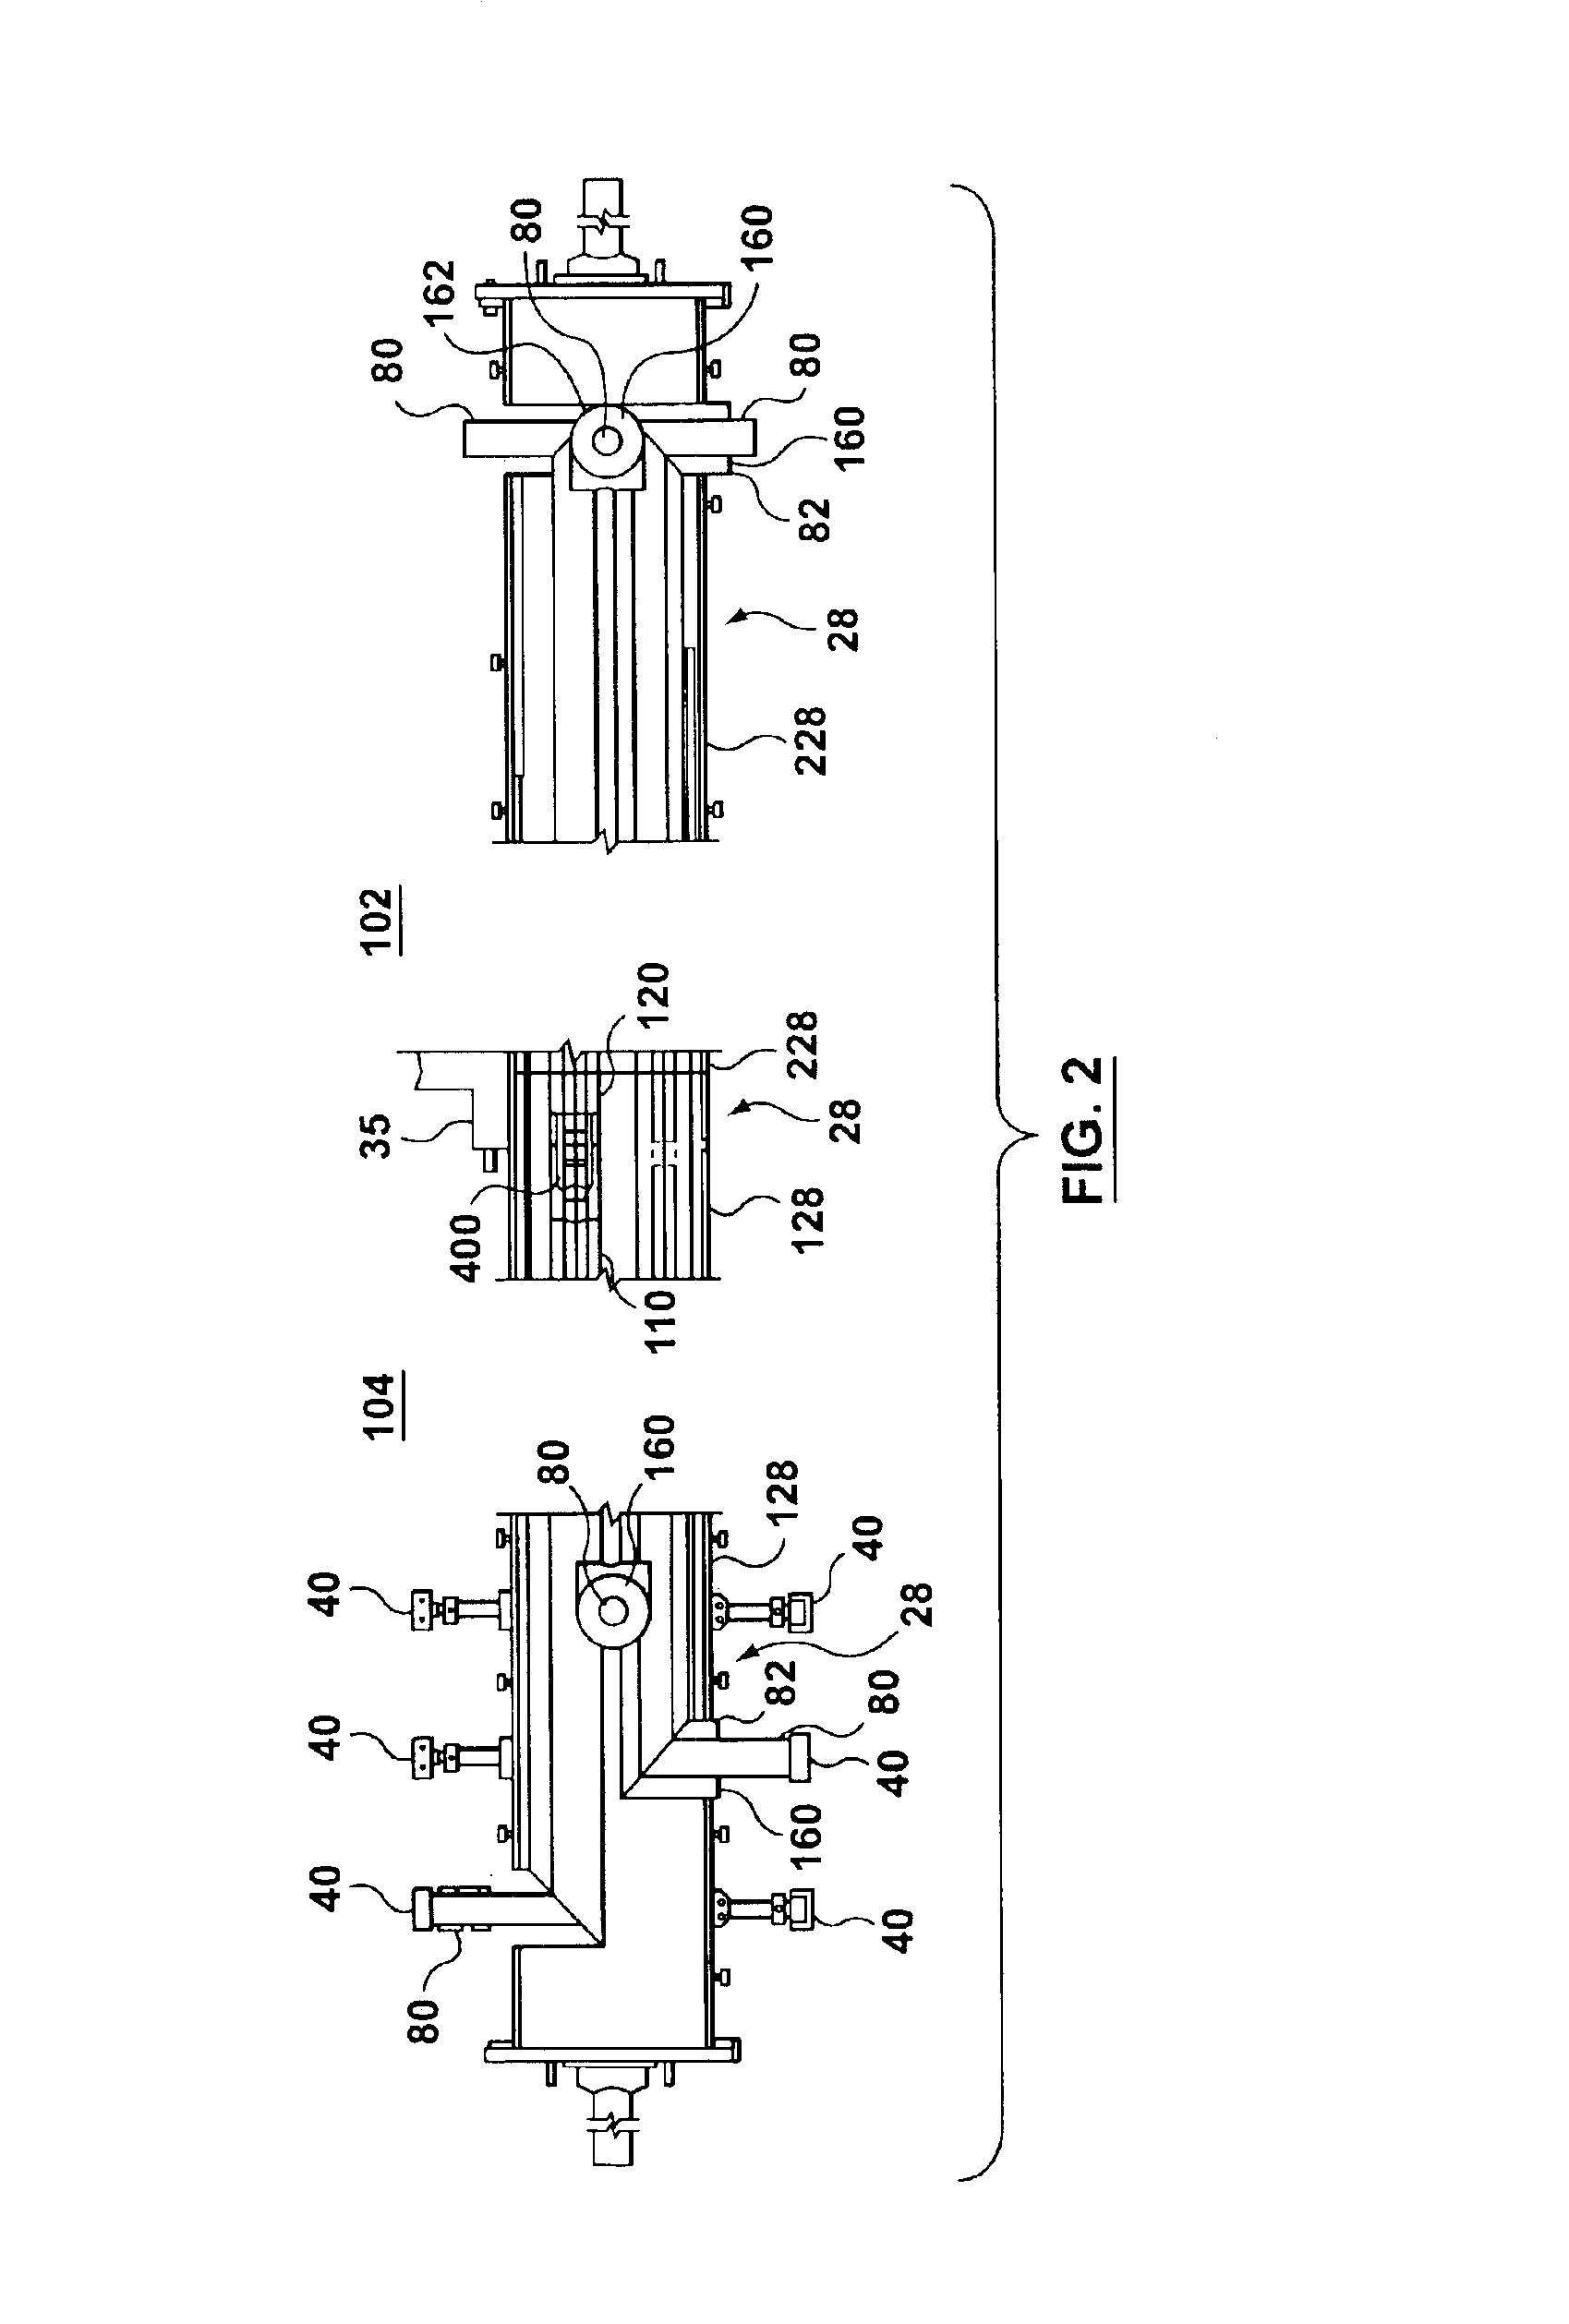 High power rotary transformer with bus duct assembly